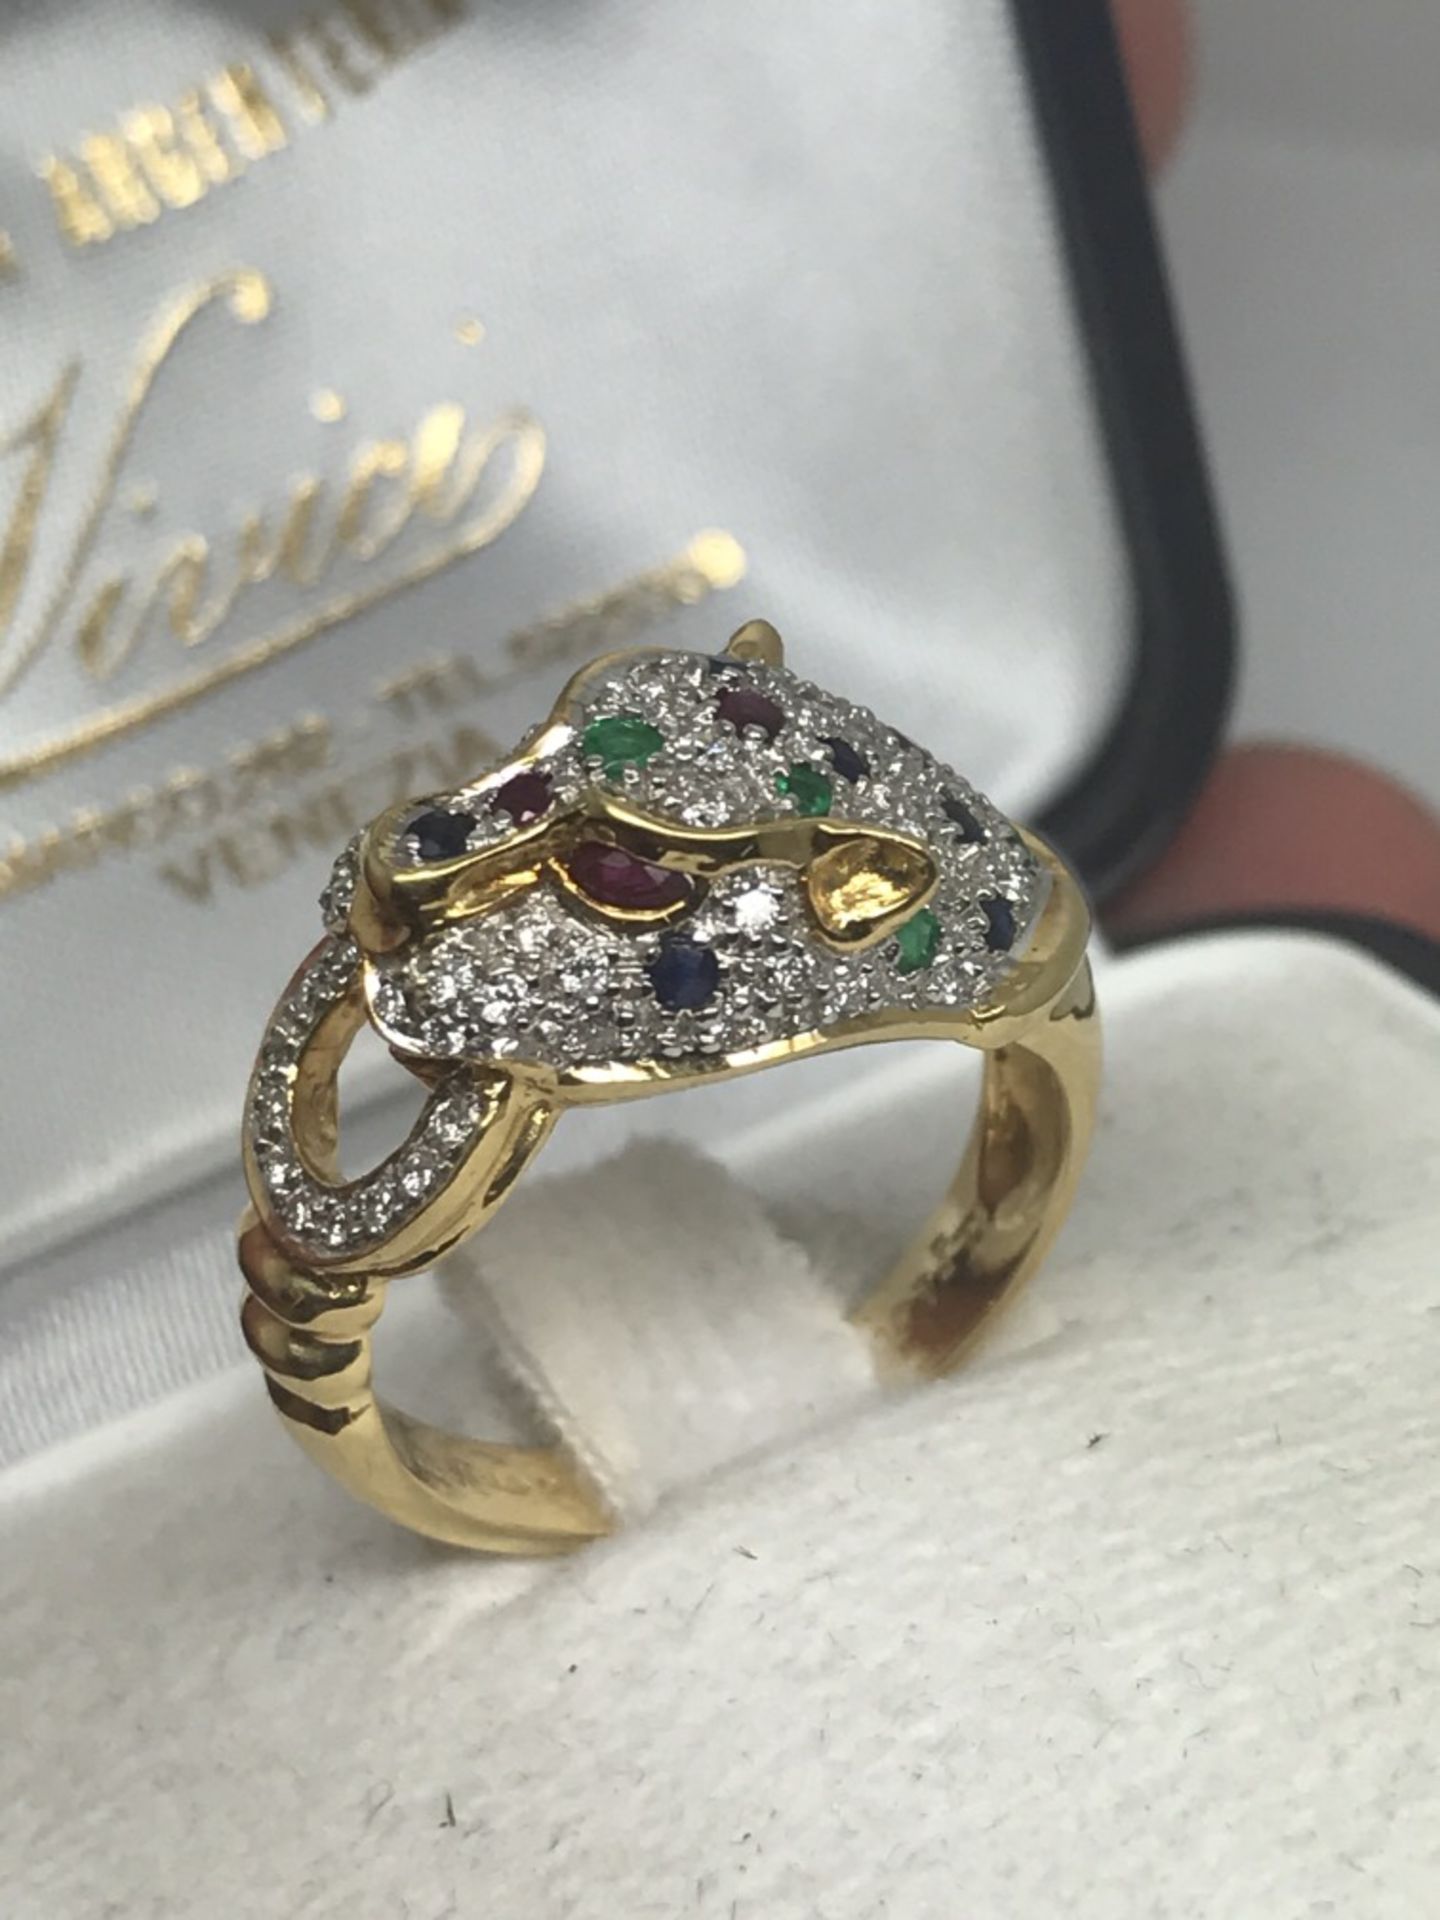 18ct GOLD CARTIER STYLE PANTHER RING SET WITH DIAMONDS, RUBIES, EMERALDS & SAPPHIRES